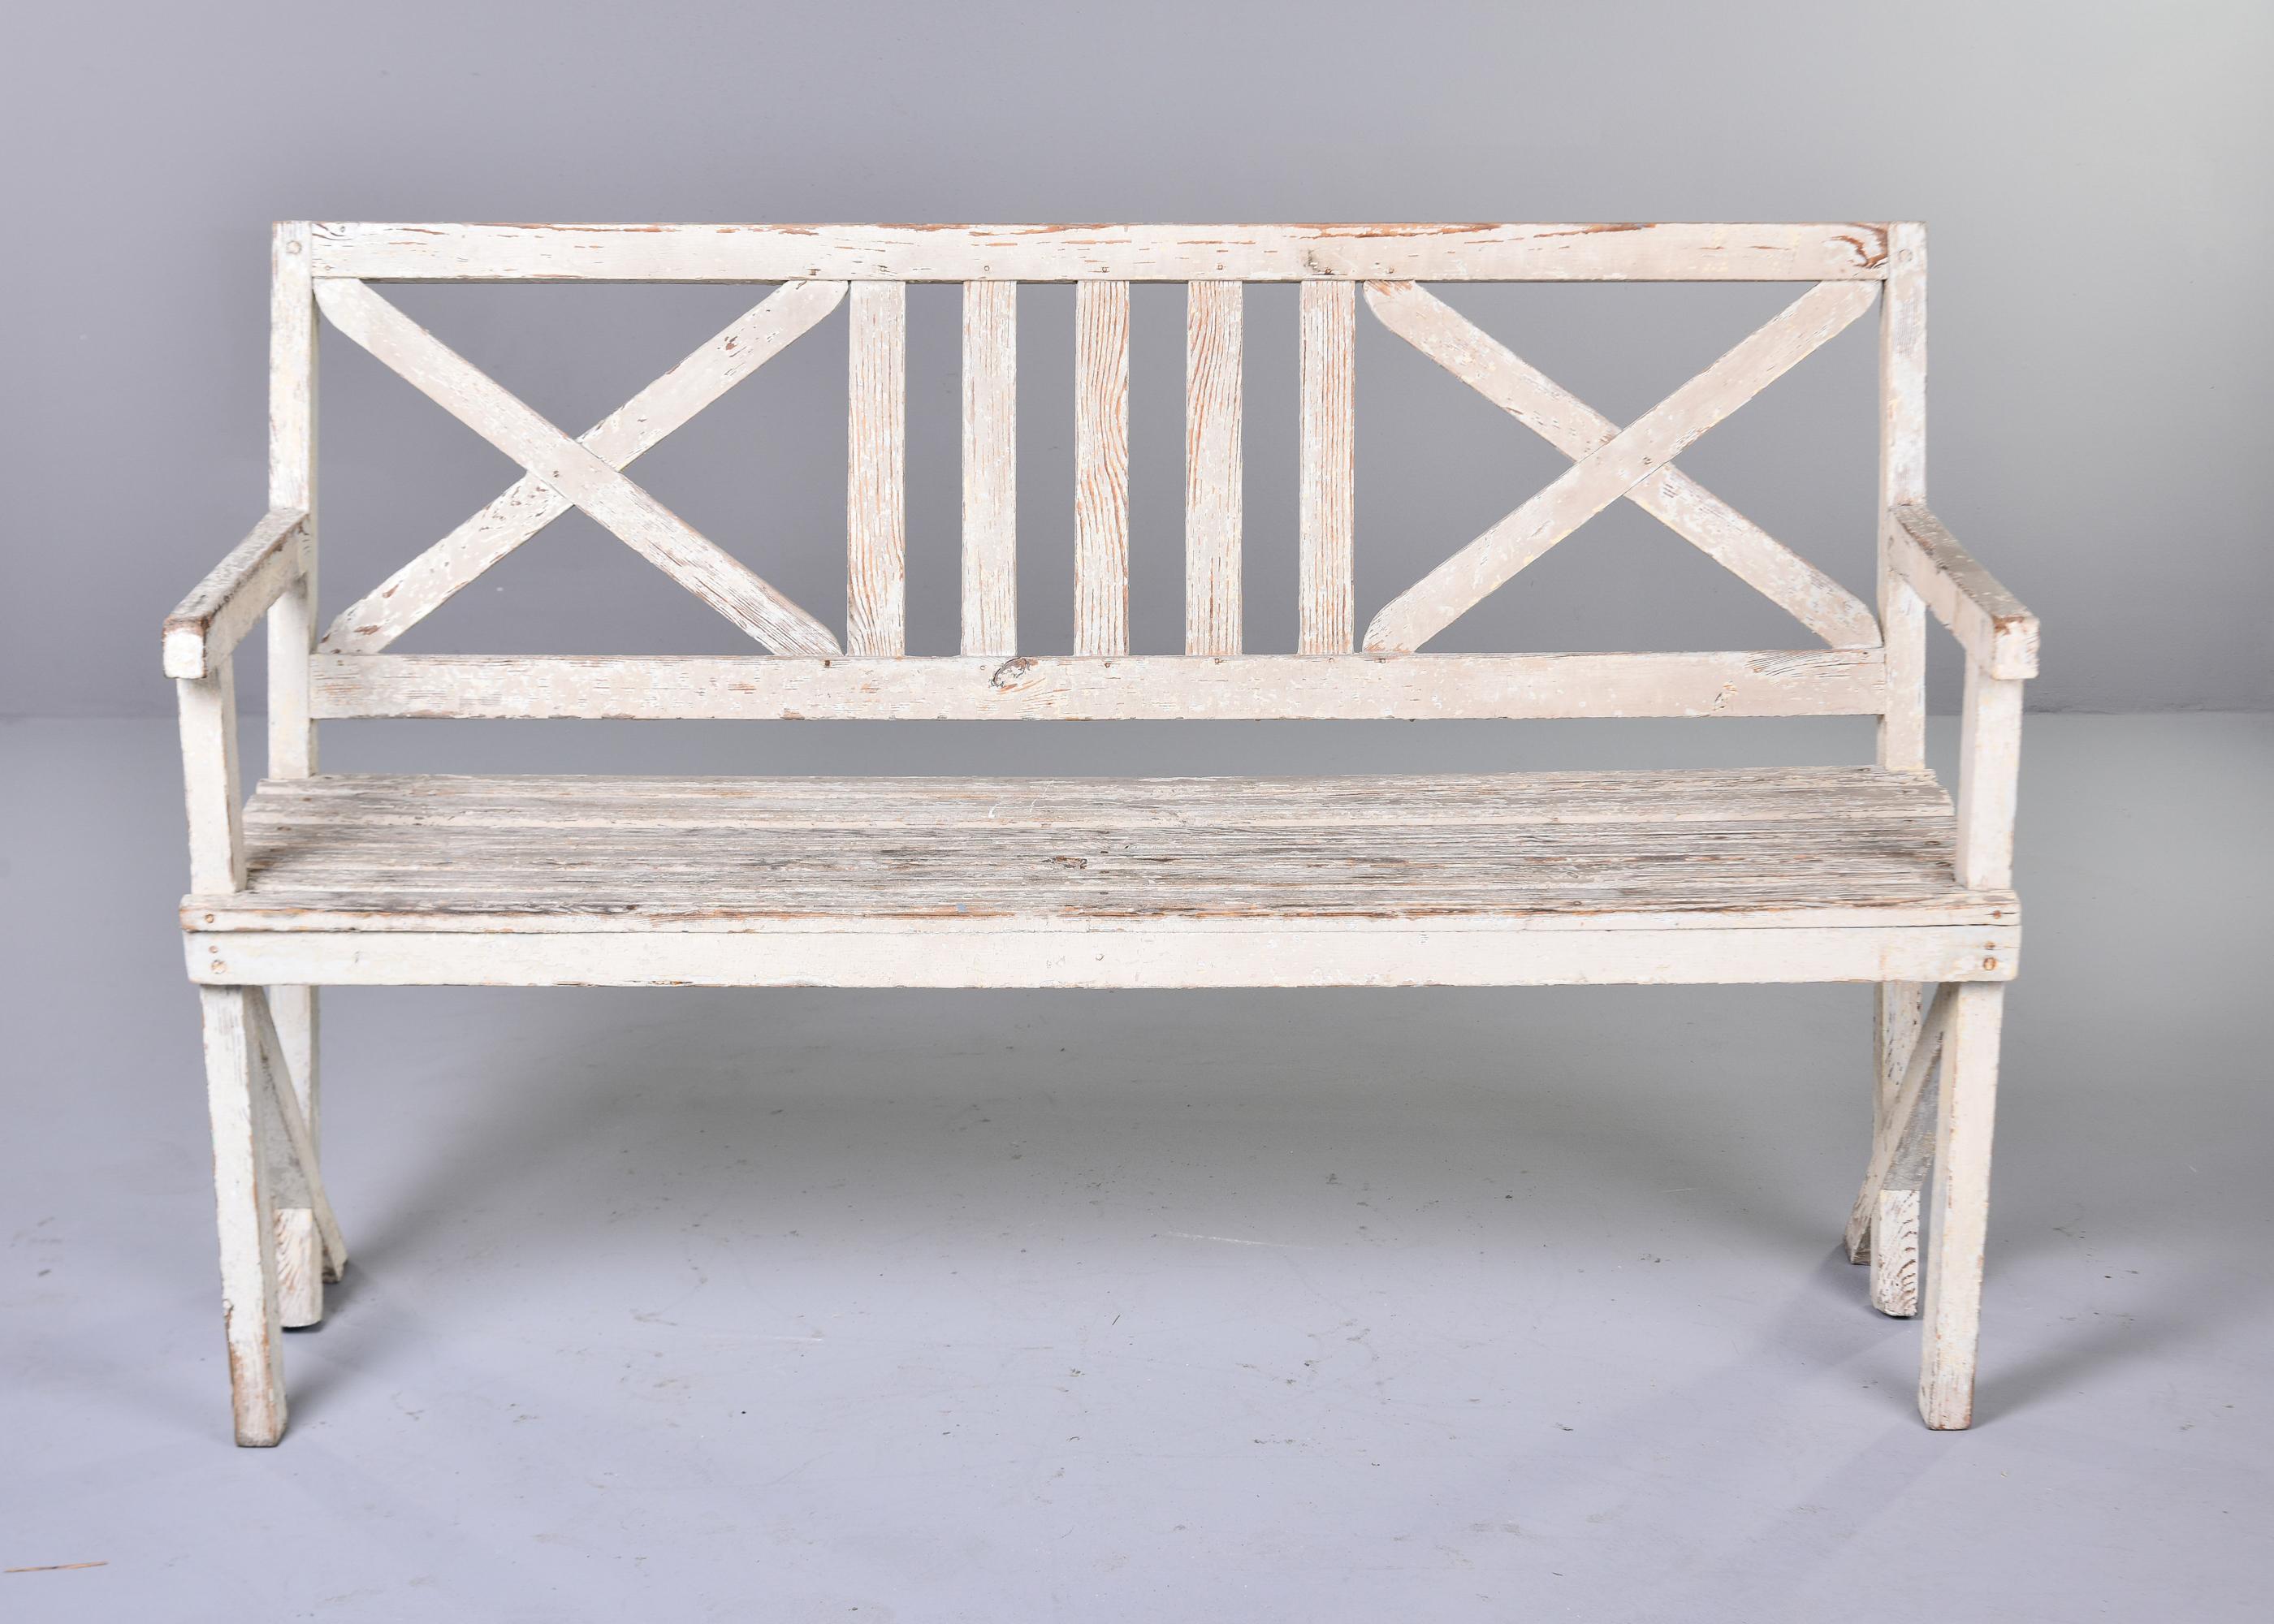 Antique English Painted Wood Bench with Cross Accented Back In Good Condition For Sale In Troy, MI